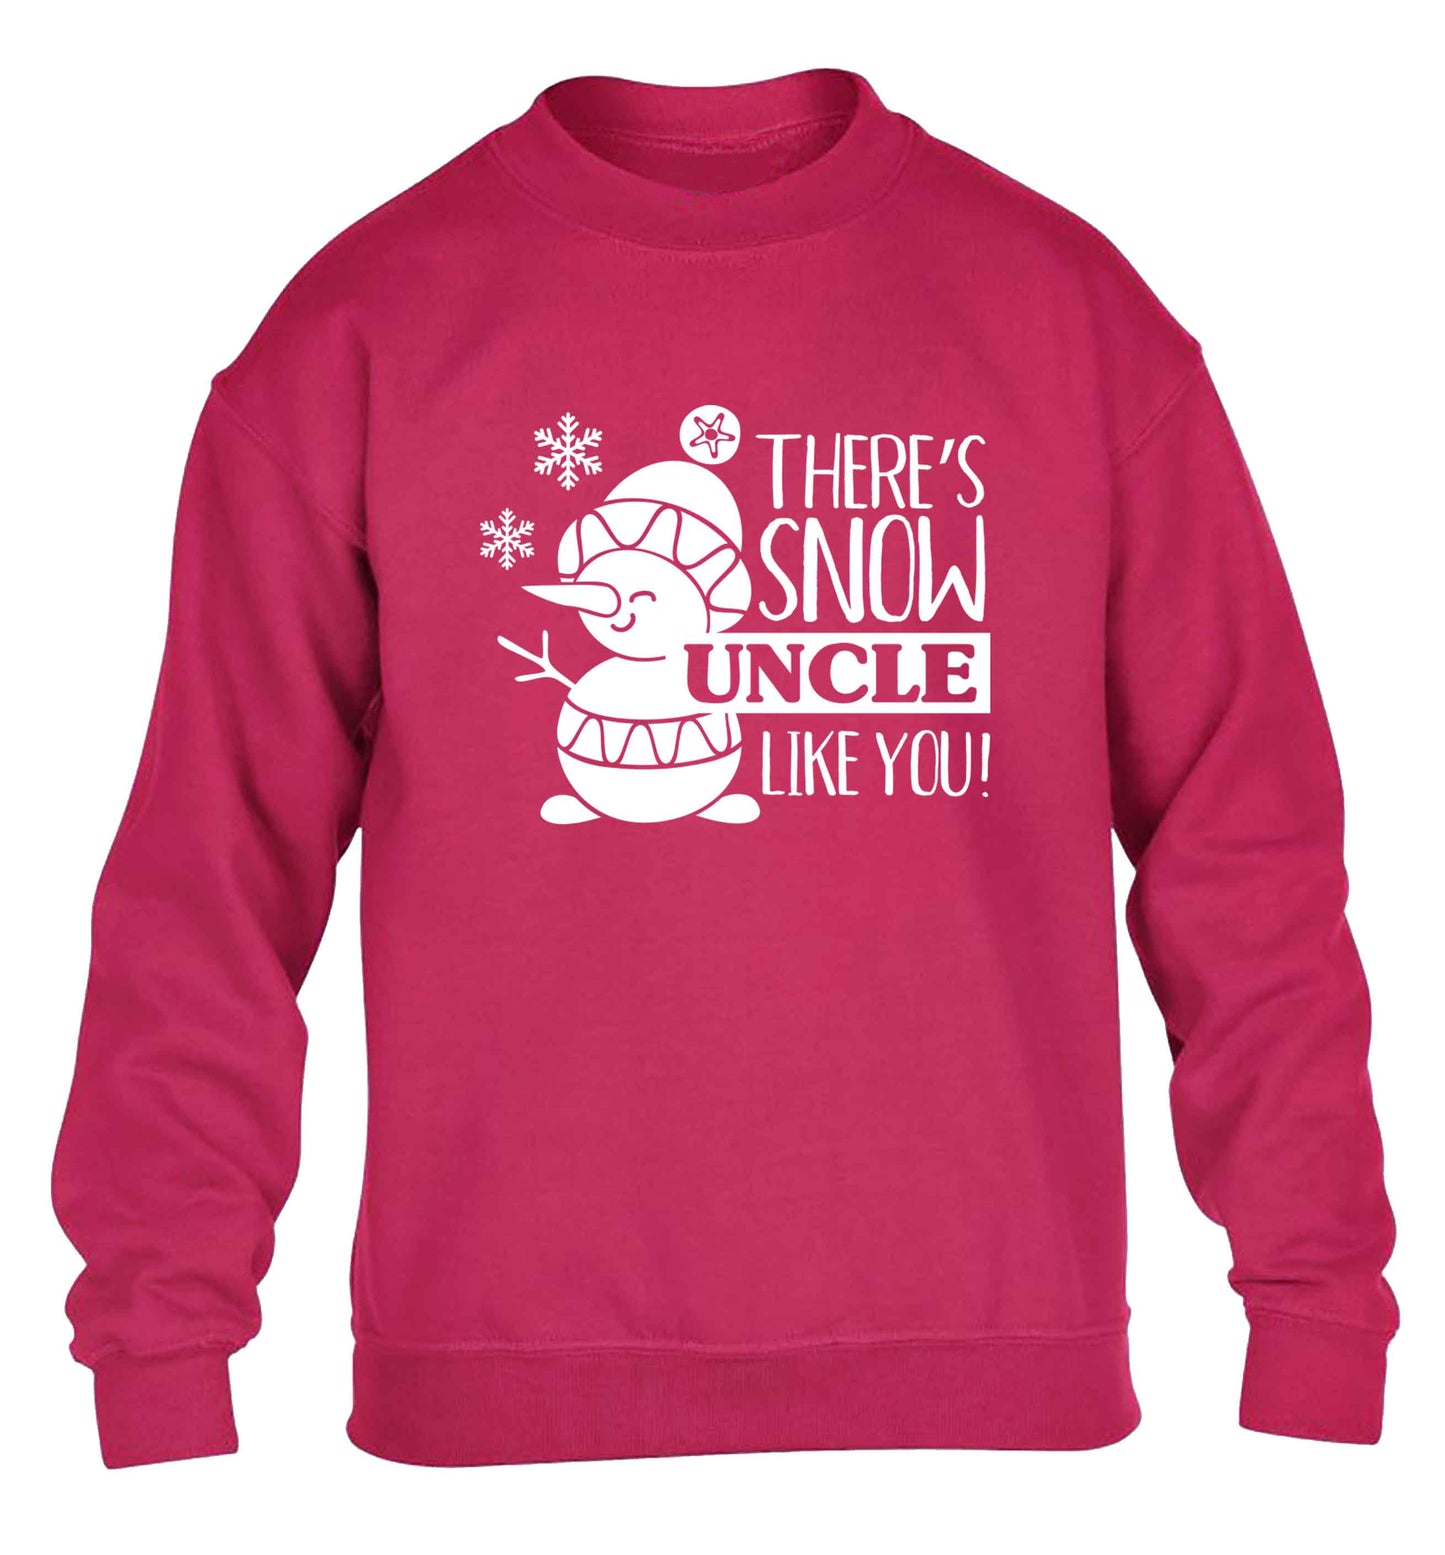 There's snow uncle like you children's pink sweater 12-13 Years